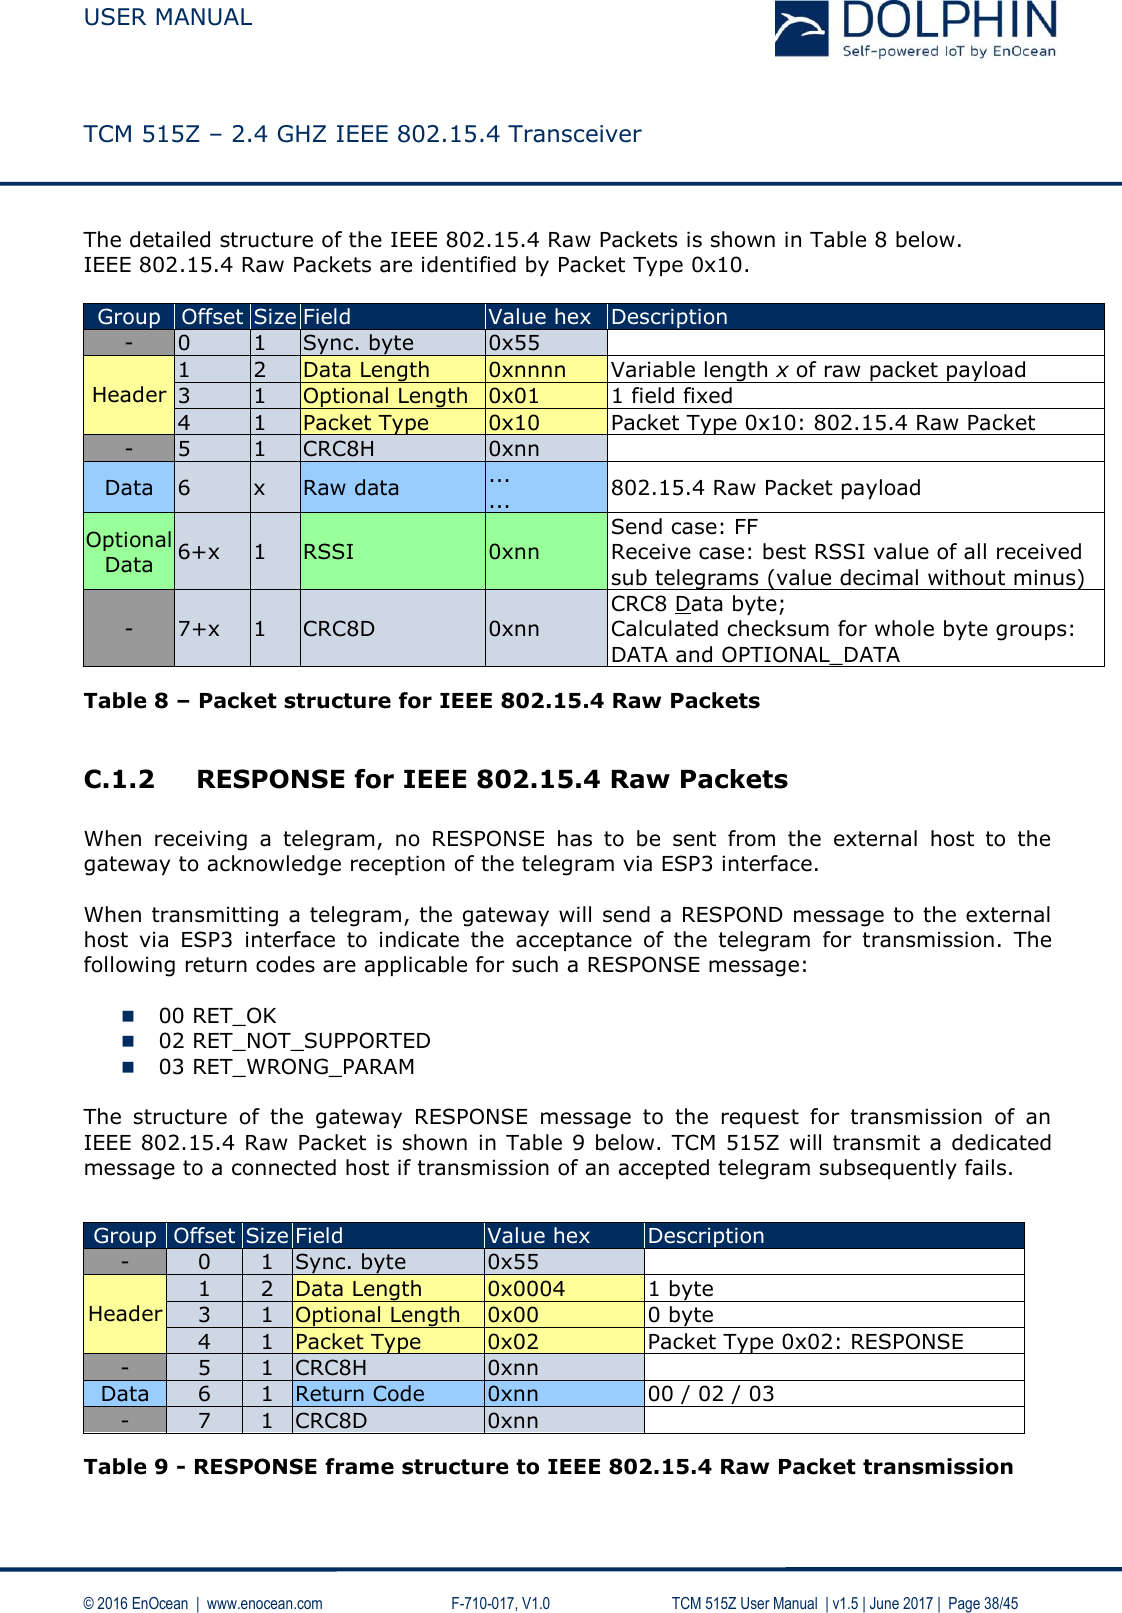  USER MANUAL    TCM 515Z – 2.4 GHZ IEEE 802.15.4 Transceiver   © 2016 EnOcean  |  www.enocean.com     F-710-017, V1.0        TCM 515Z User Manual  | v1.5 | June 2017 |  Page 38/45 The detailed structure of the IEEE 802.15.4 Raw Packets is shown in Table 8 below.  IEEE 802.15.4 Raw Packets are identified by Packet Type 0x10.  Group Offset Size Field Value hex Description - 0 1 Sync. byte 0x55   Header 1 2 Data Length 0xnnnn Variable length x of raw packet payload 3 1 Optional Length 0x01 1 field fixed 4 1 Packet Type 0x10 Packet Type 0x10: 802.15.4 Raw Packet - 5 1 CRC8H 0xnn  Data 6 x Raw data ... ... 802.15.4 Raw Packet payload Optional Data 6+x 1 RSSI 0xnn Send case: FF Receive case: best RSSI value of all received sub telegrams (value decimal without minus) - 7+x 1 CRC8D 0xnn CRC8 Data byte;  Calculated checksum for whole byte groups: DATA and OPTIONAL_DATA  Table 8 – Packet structure for IEEE 802.15.4 Raw Packets  C.1.2 RESPONSE for IEEE 802.15.4 Raw Packets  When  receiving  a  telegram,  no  RESPONSE  has  to  be  sent  from  the  external  host  to  the gateway to acknowledge reception of the telegram via ESP3 interface.   When transmitting a telegram, the gateway will send a RESPOND message to the external host  via  ESP3  interface  to  indicate  the  acceptance  of  the  telegram  for  transmission.  The following return codes are applicable for such a RESPONSE message:   00 RET_OK  02 RET_NOT_SUPPORTED  03 RET_WRONG_PARAM  The  structure  of  the  gateway  RESPONSE  message  to  the  request  for  transmission  of  an IEEE 802.15.4 Raw Packet is shown in Table 9 below. TCM 515Z will transmit a dedicated message to a connected host if transmission of an accepted telegram subsequently fails.   Group Offset Size Field Value hex Description - 0 1 Sync. byte 0x55   Header 1 2 Data Length 0x0004 1 byte 3 1 Optional Length 0x00 0 byte 4 1 Packet Type 0x02 Packet Type 0x02: RESPONSE - 5 1 CRC8H 0xnn  Data 6 1 Return Code 0xnn 00 / 02 / 03 - 7 1 CRC8D 0xnn   Table 9 - RESPONSE frame structure to IEEE 802.15.4 Raw Packet transmission 